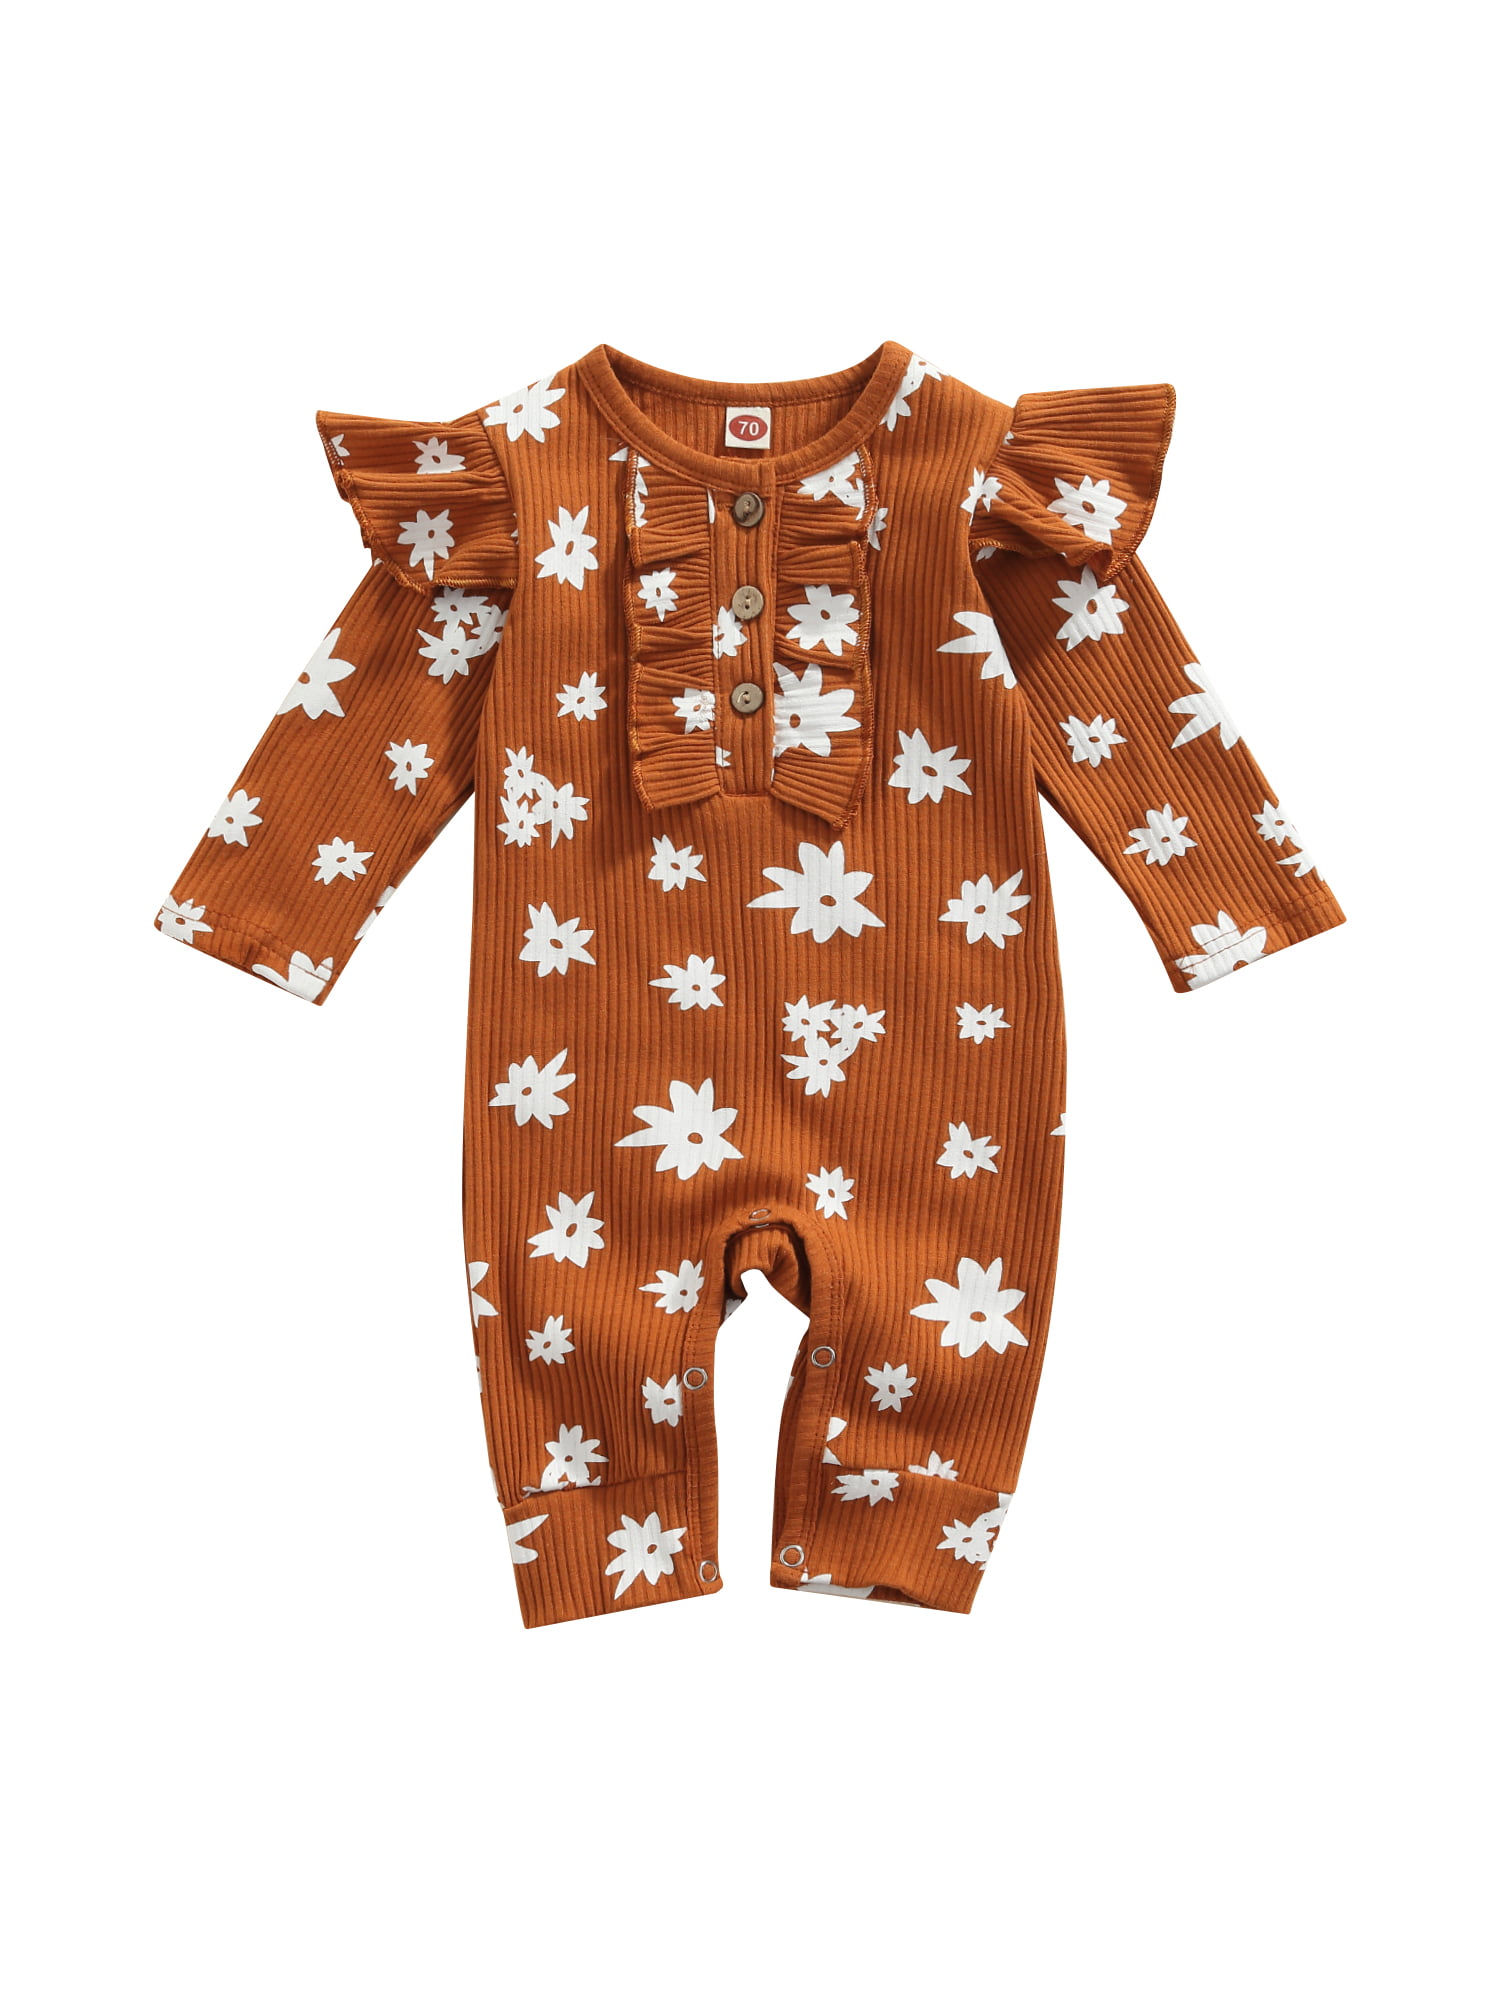 Infant Newborn Baby Optional Color Jumpsuit Romper with PRINCESS Printing NB-12M